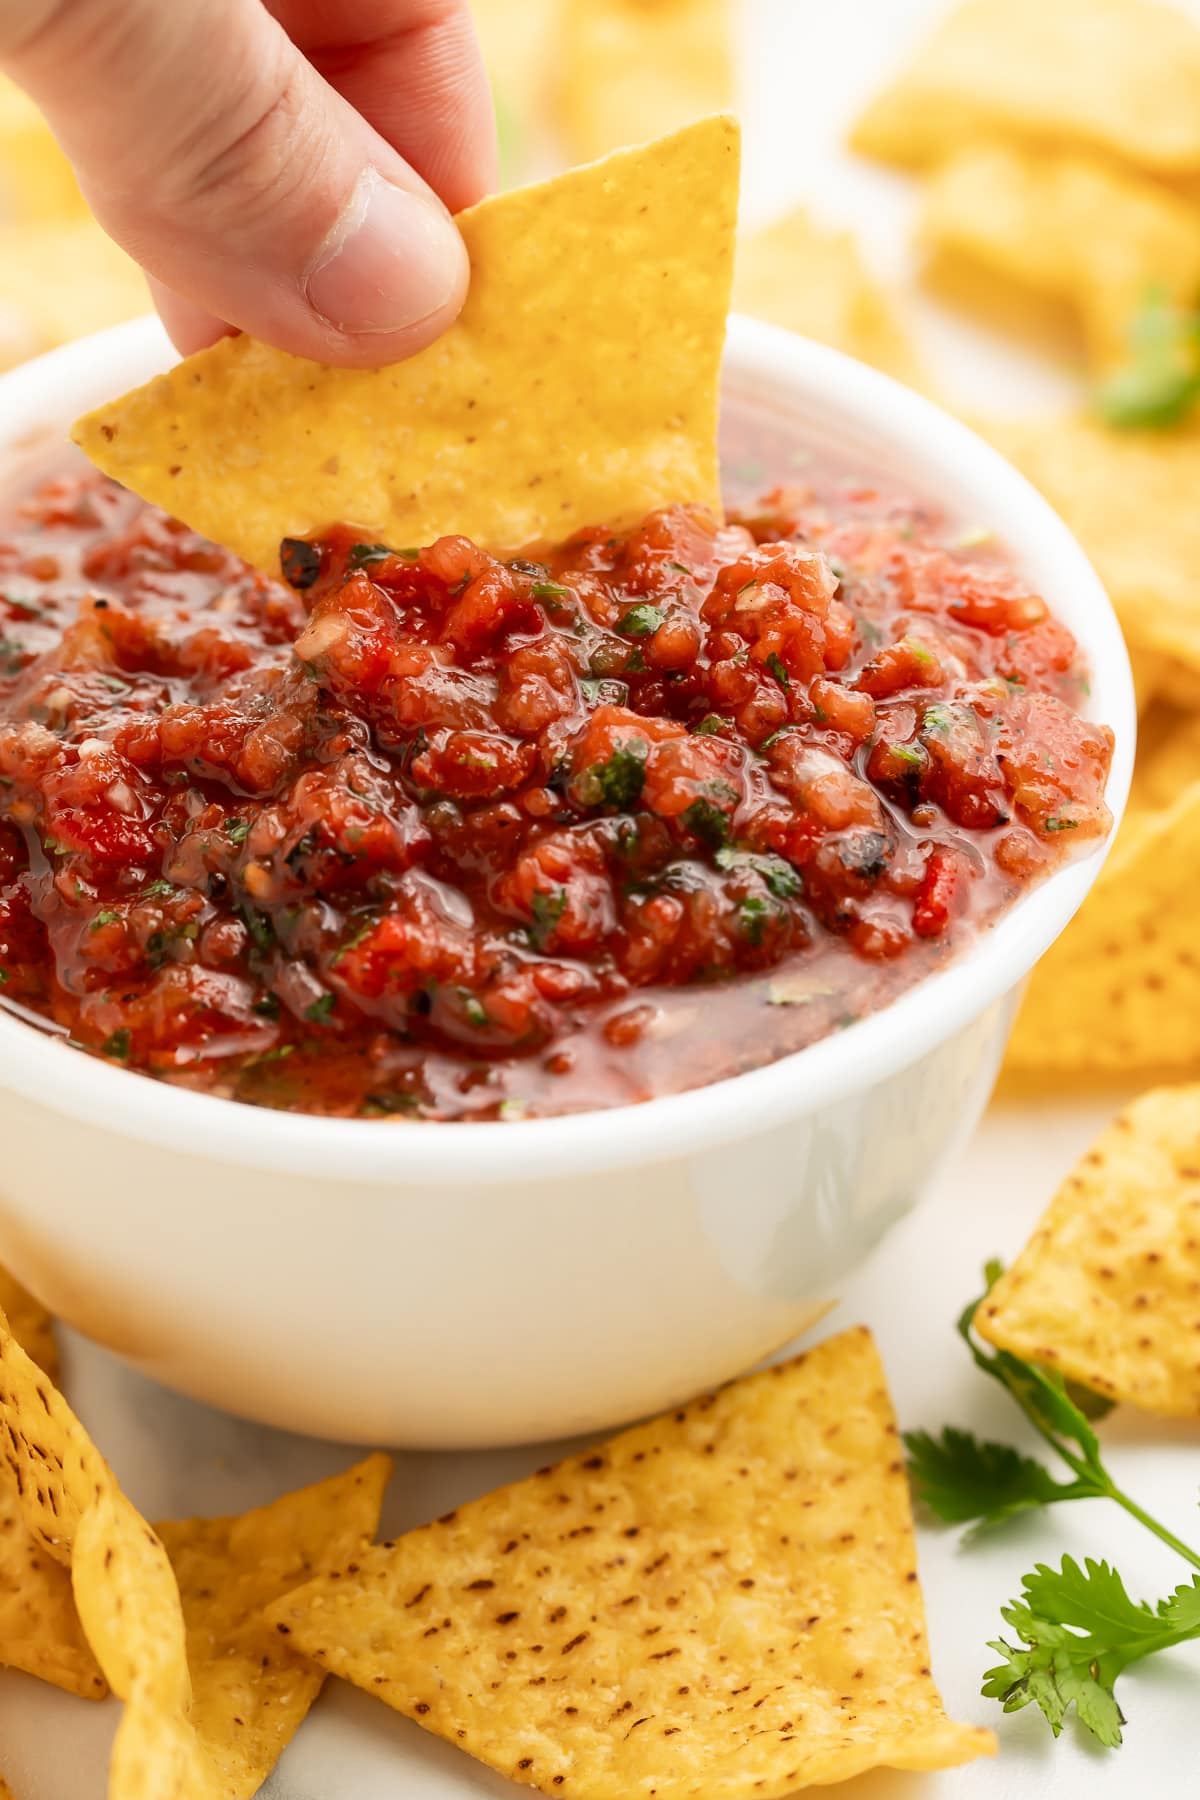 A white woman's hand holding a tortilla chip and using it to scoop red, chunky salsa out of a white bowl.